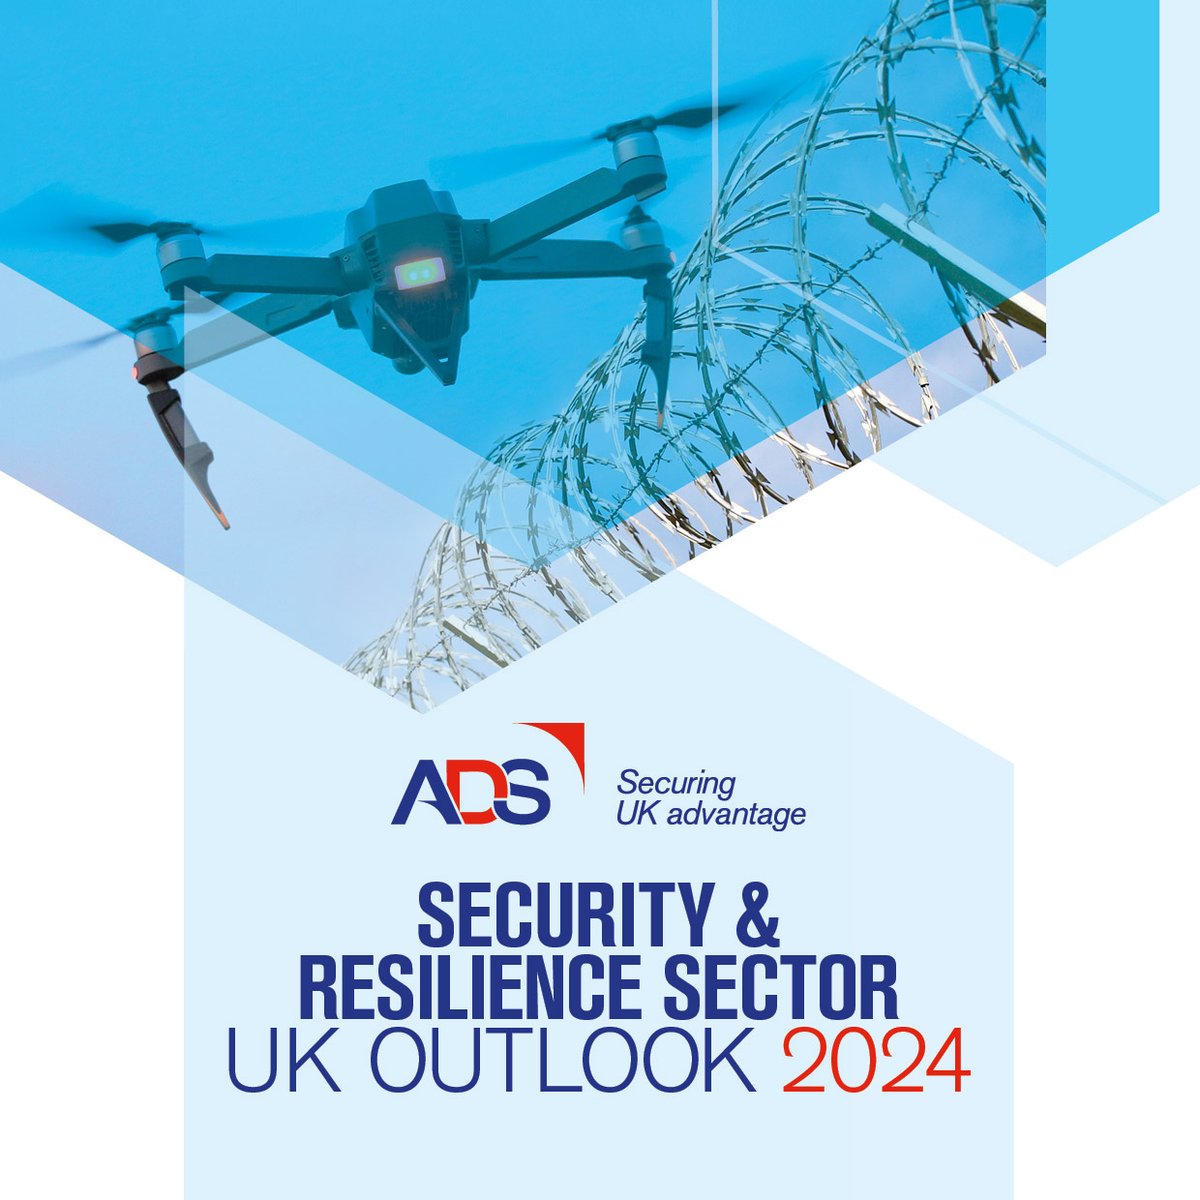 Today, we're proud to launch the 2024 UK Security and Resilience Sector Outlook - highlighting: 👥 148,000 direct employees (doubling over 10 years) 📈 £12.2bn in value add to the UK economy 🌍 228% increase in exports over 10 years View Outlook: bit.ly/SRoutlook2024